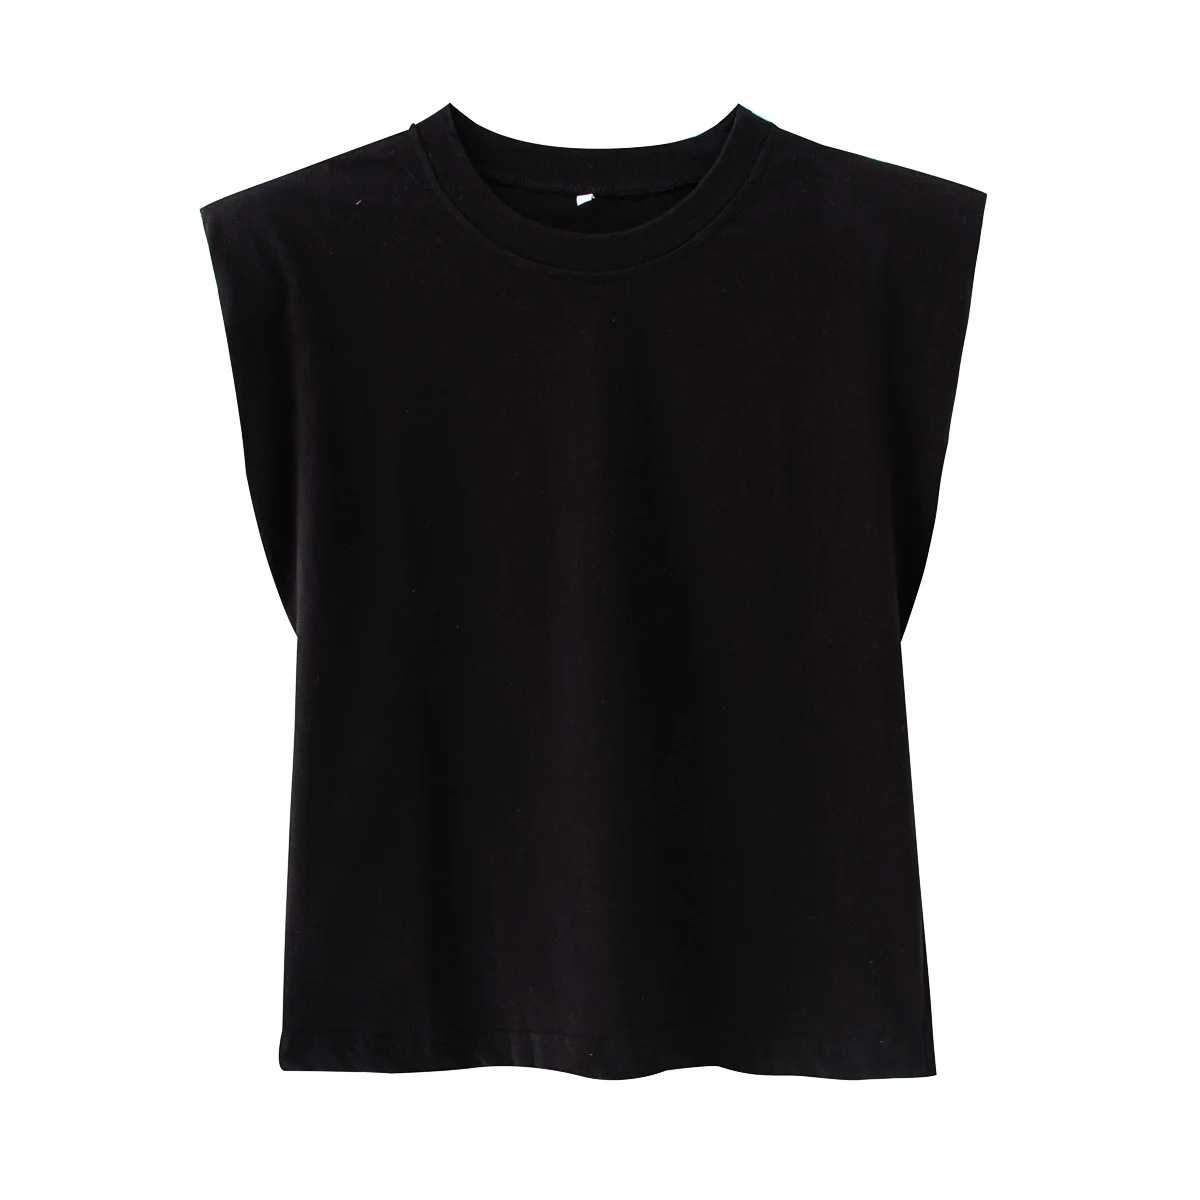 Cool Pad Shoulder Tank Top Tee Shirt With Shoulder Pads on sale - SOUISEE